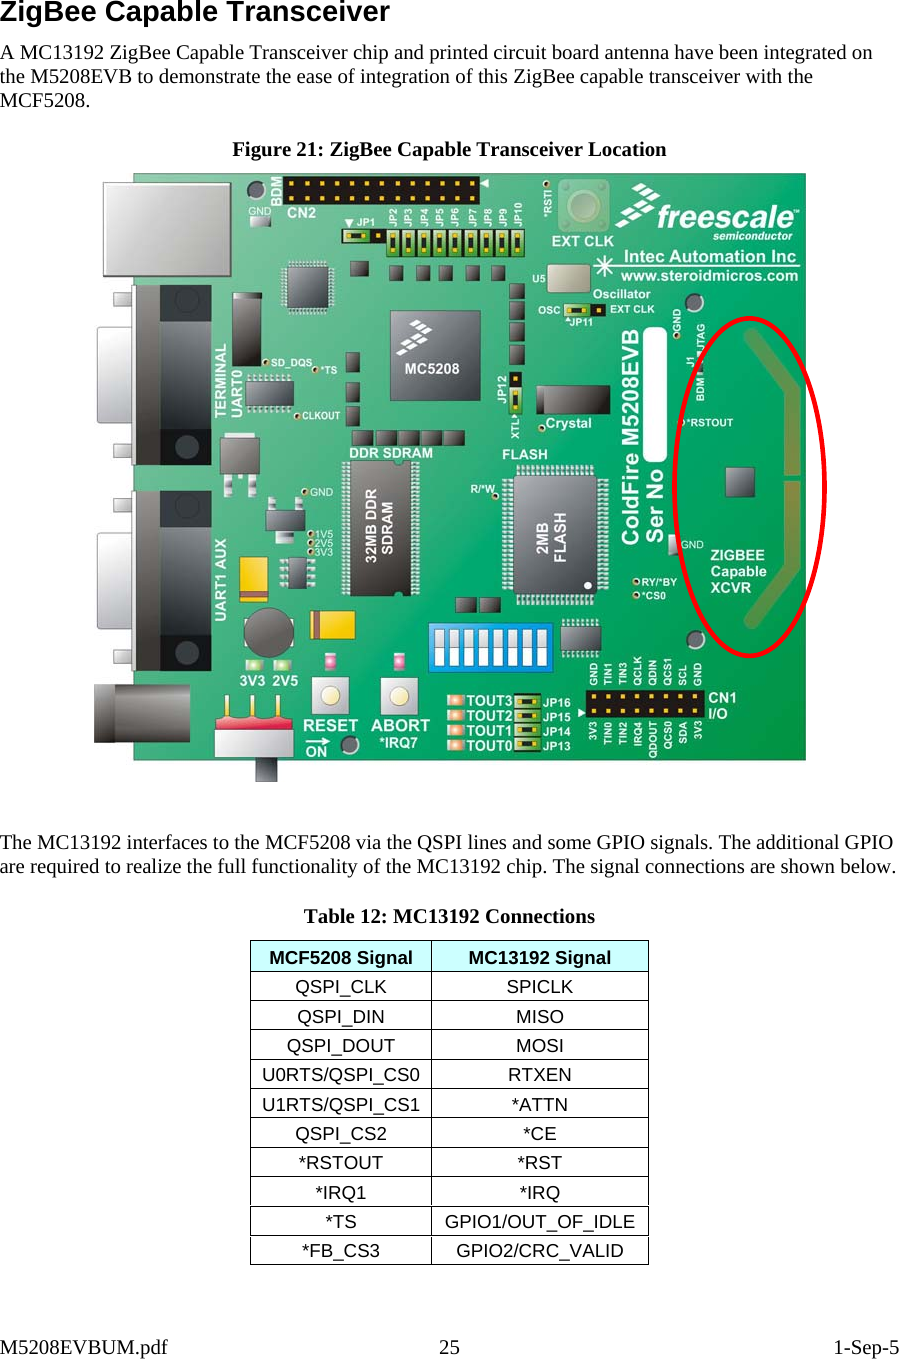   ZigBee Capable Transceiver A MC13192 ZigBee Capable Transceiver chip and printed circuit board antenna have been integrated on the M5208EVB to demonstrate the ease of integration of this ZigBee capable transceiver with the MCF5208.  Figure 21: ZigBee Capable Transceiver Location   The MC13192 interfaces to the MCF5208 via the QSPI lines and some GPIO signals. The additional GPIO are required to realize the full functionality of the MC13192 chip. The signal connections are shown below.  Table 12: MC13192 Connections MCF5208 Signal  MC13192 Signal QSPI_CLK SPICLK QSPI_DIN MISO QSPI_DOUT MOSI U0RTS/QSPI_CS0 RTXEN U1RTS/QSPI_CS1 *ATTN QSPI_CS2 *CE *RSTOUT *RST *IRQ1 *IRQ *TS GPIO1/OUT_OF_IDLE *FB_CS3 GPIO2/CRC_VALID M5208EVBUM.pdf 25  1-Sep-5 